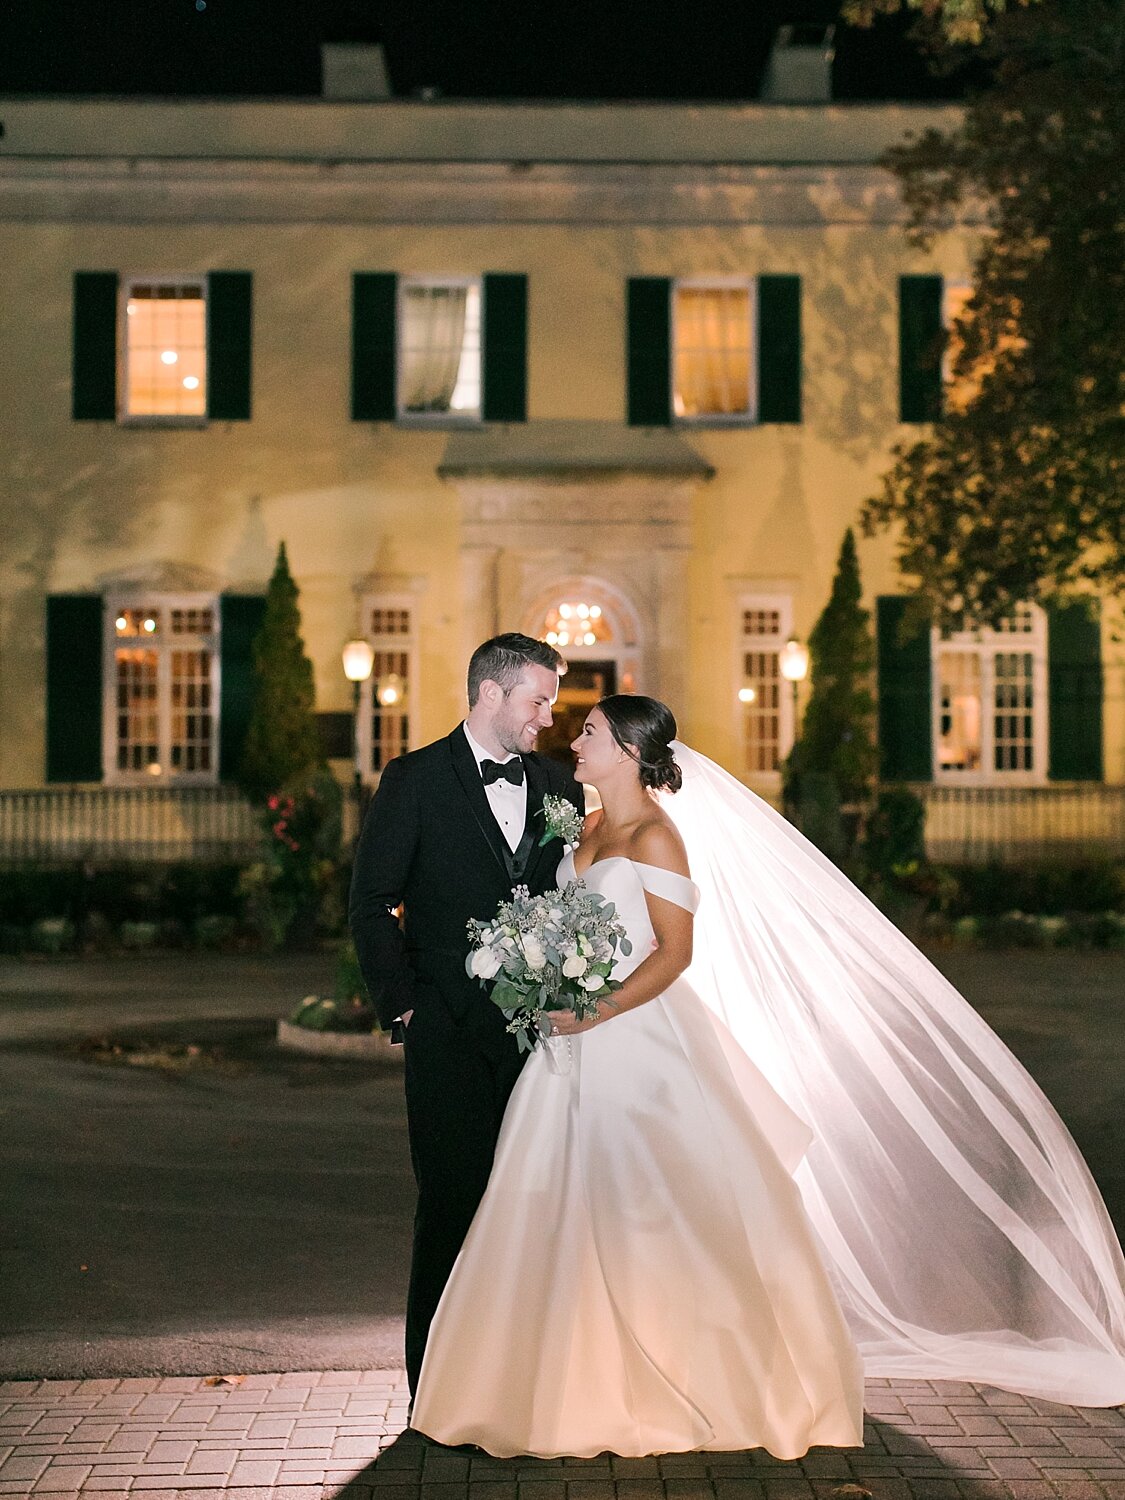 nighttime wedding portraits at the Mansion at Oyster Bay with Asher Gardner Photography